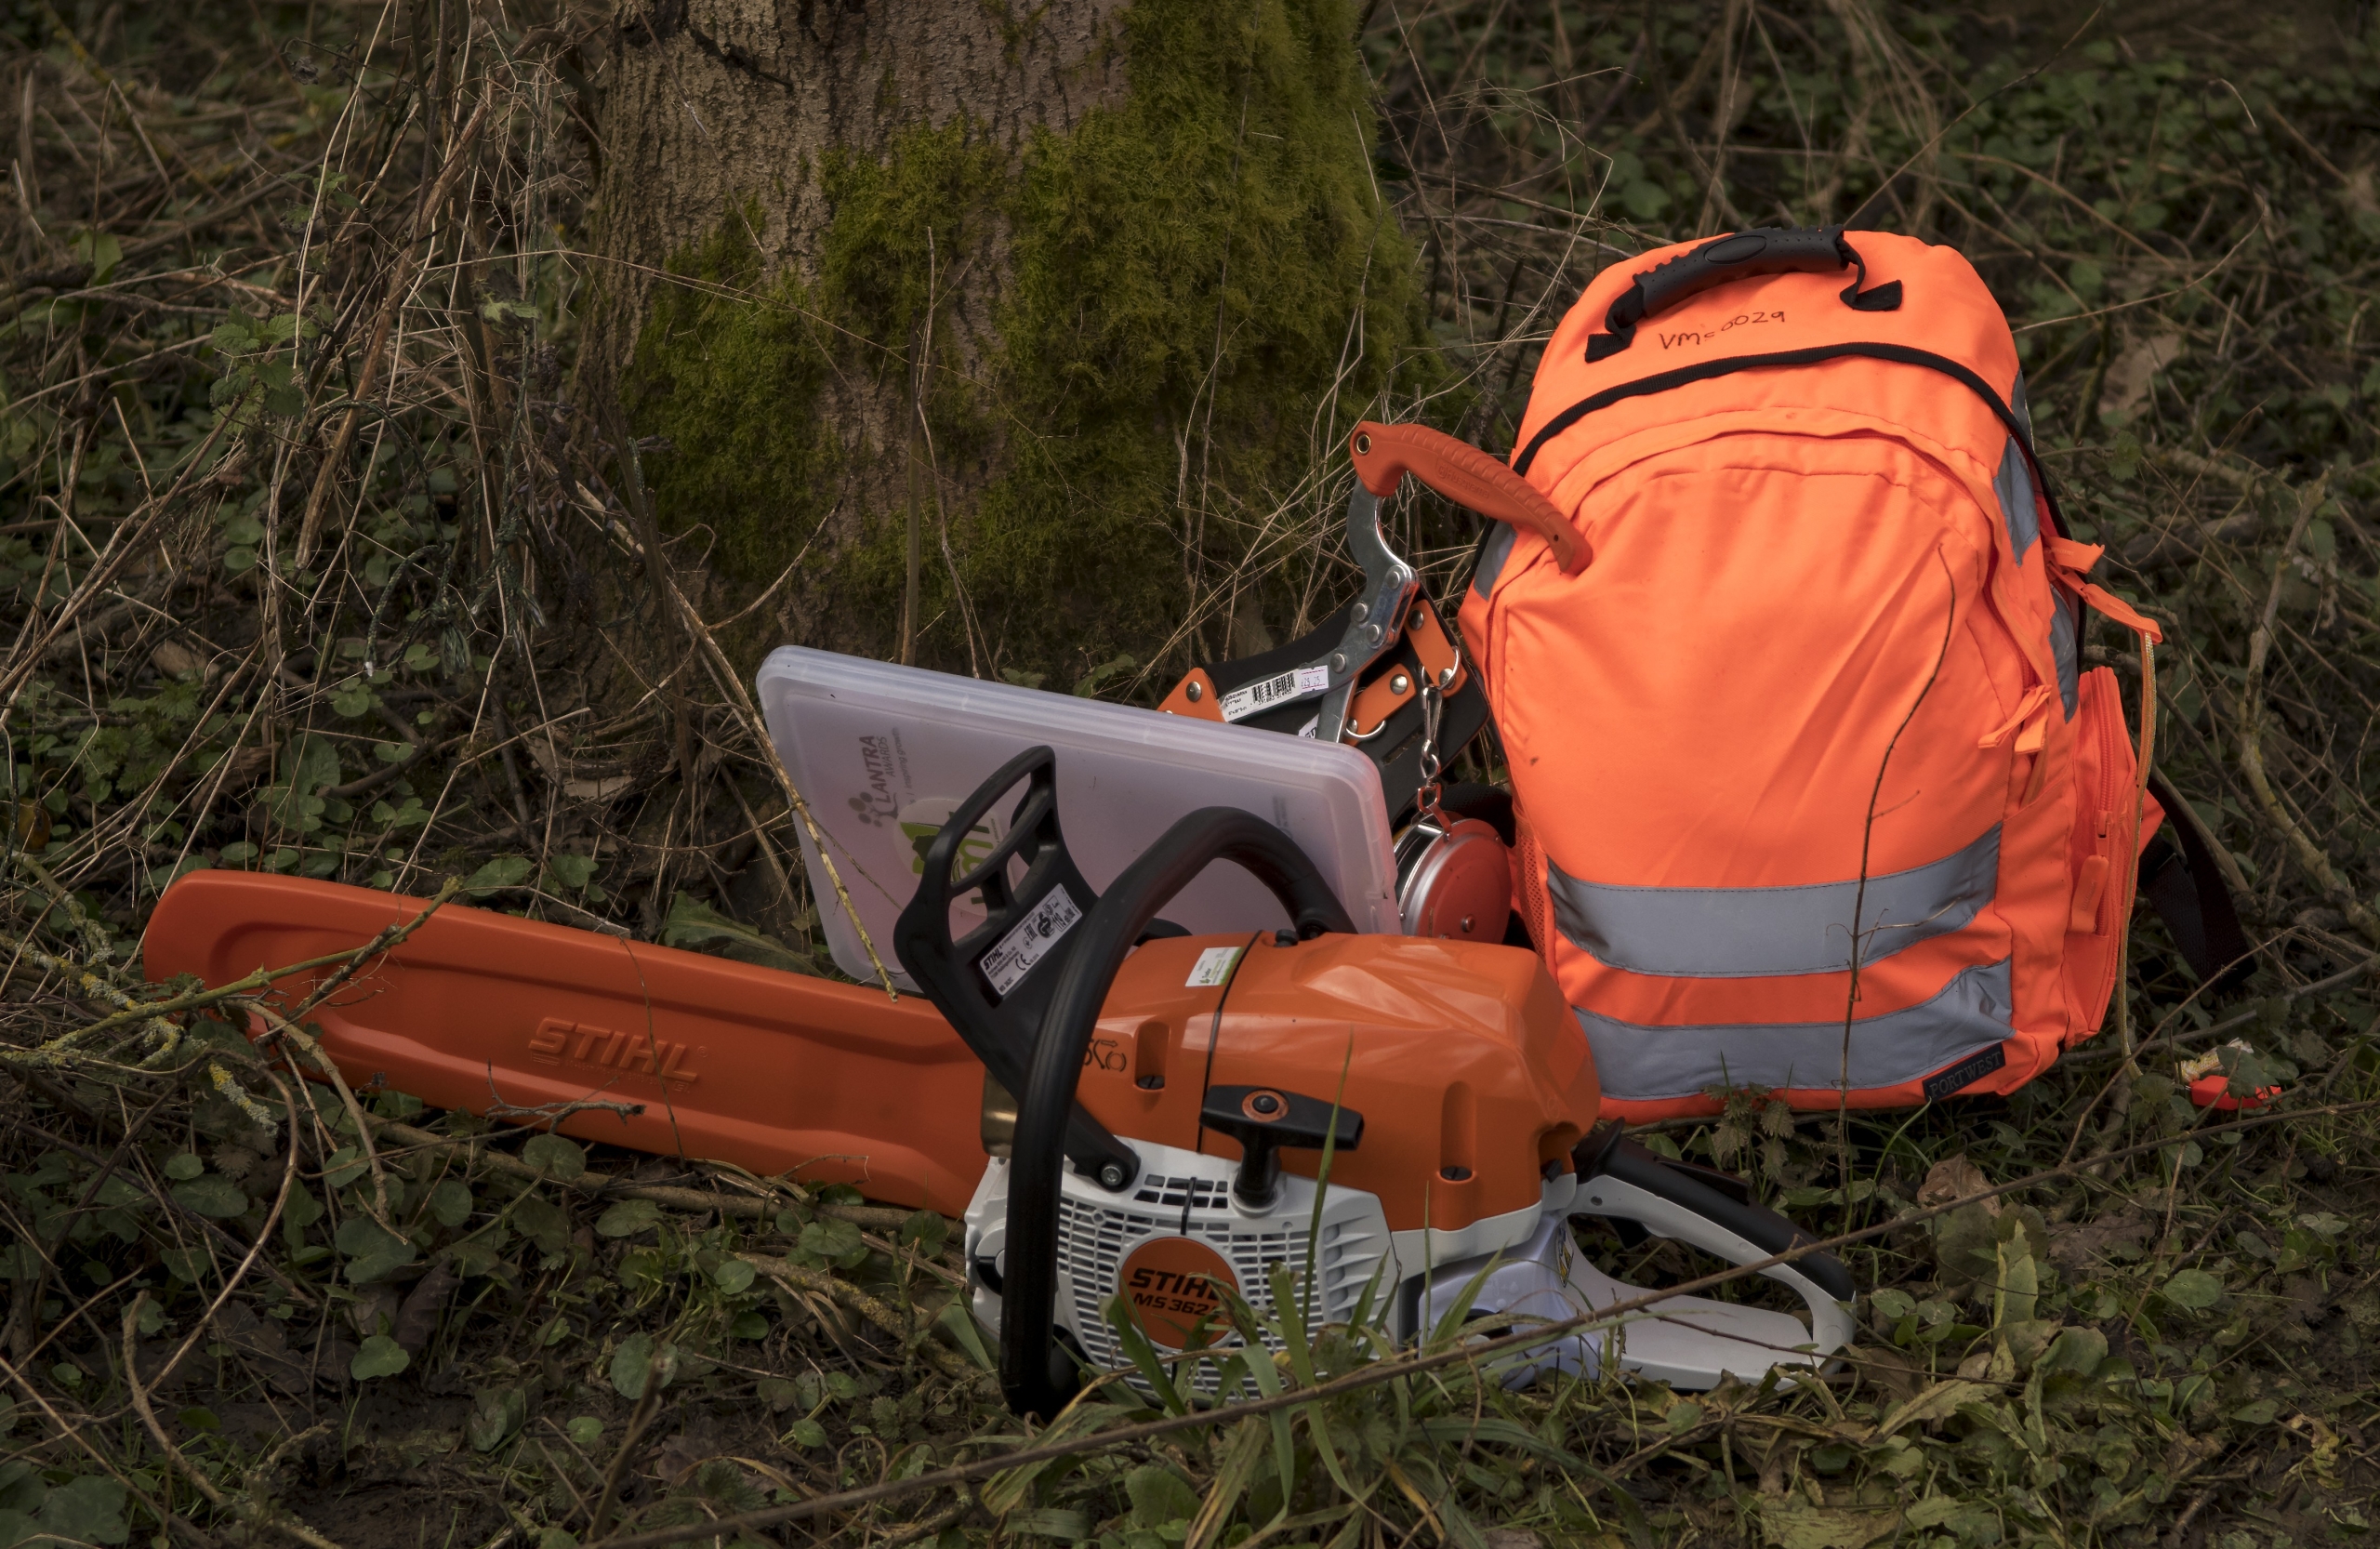 Chainsaw Maintenance and Cross-Cutting Refresher